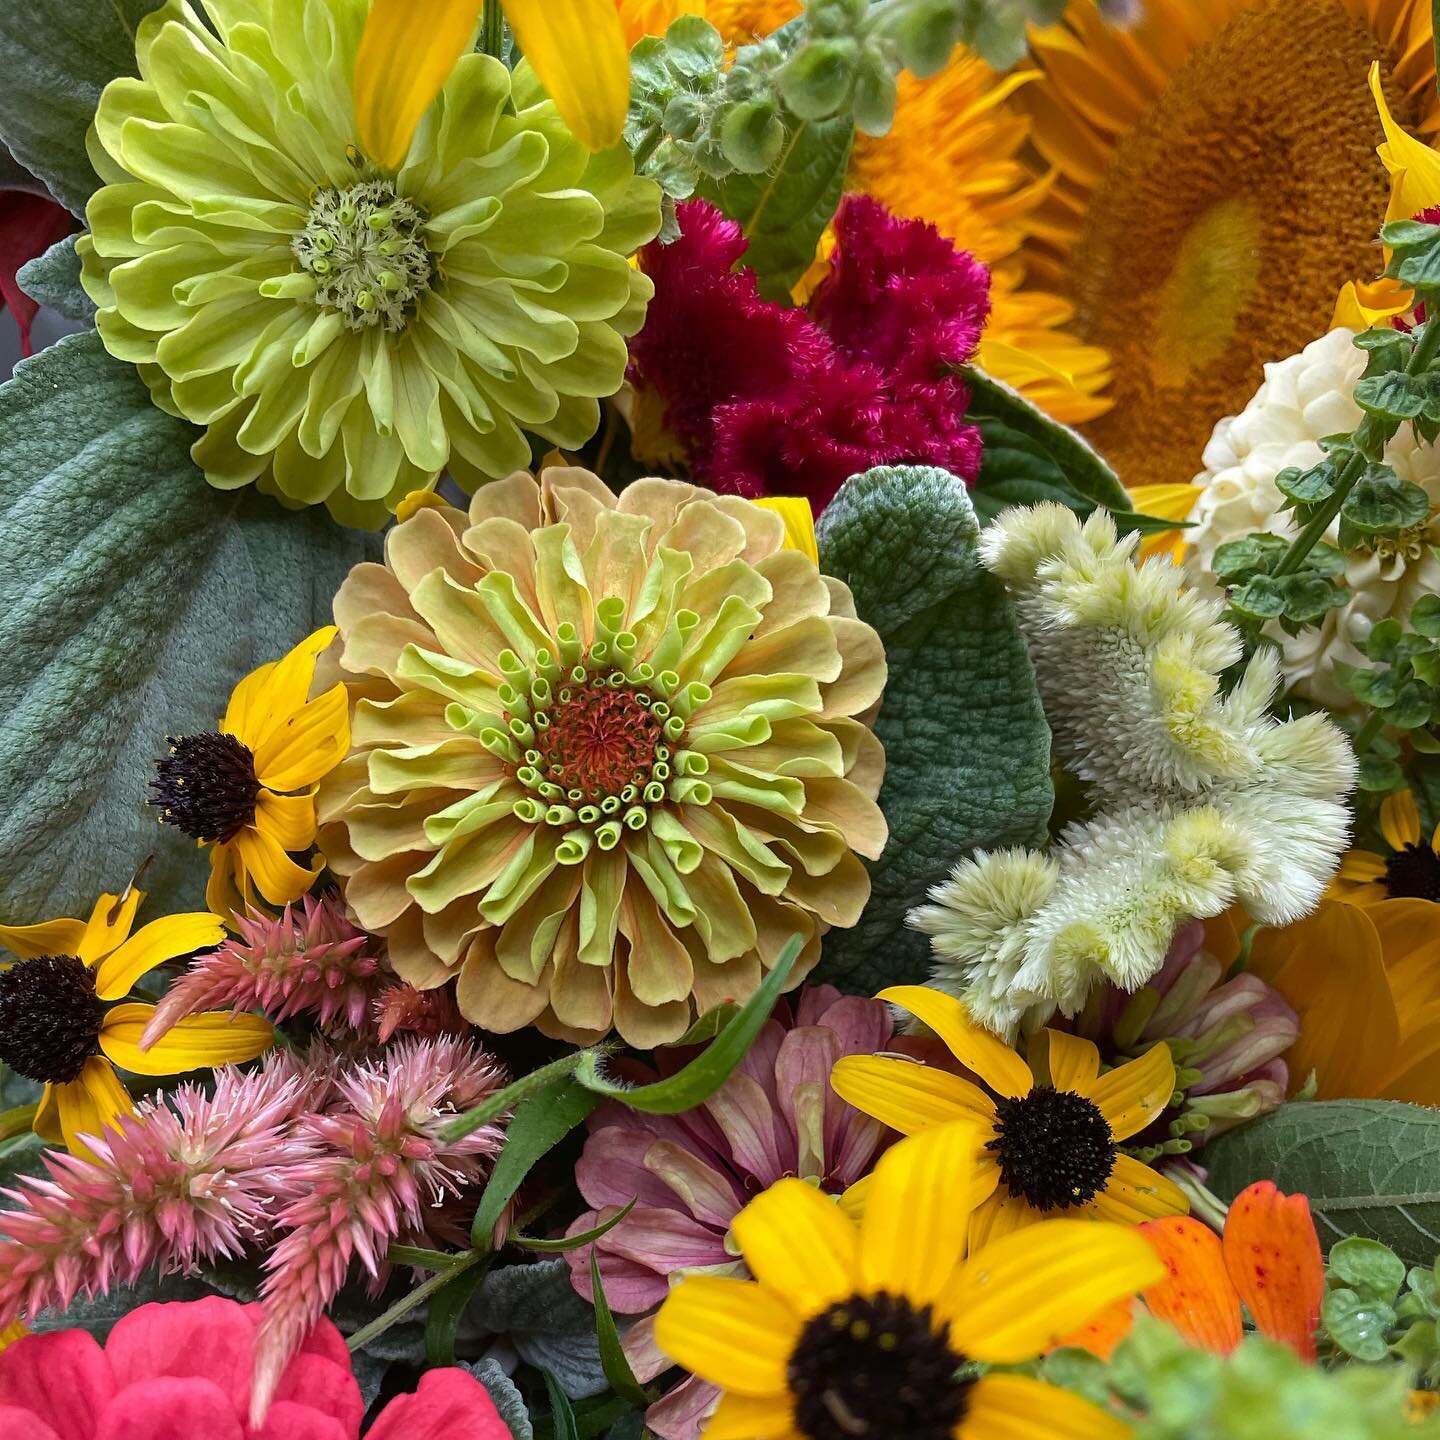 We have some fun stuff bloomin&rsquo; in the garden this week! Find us at the @franklincountyfarmersmarket Saturday. If you don&rsquo;t like getting up early (like me) and still want to get your hands on some super fresh local flowers, just holler! I